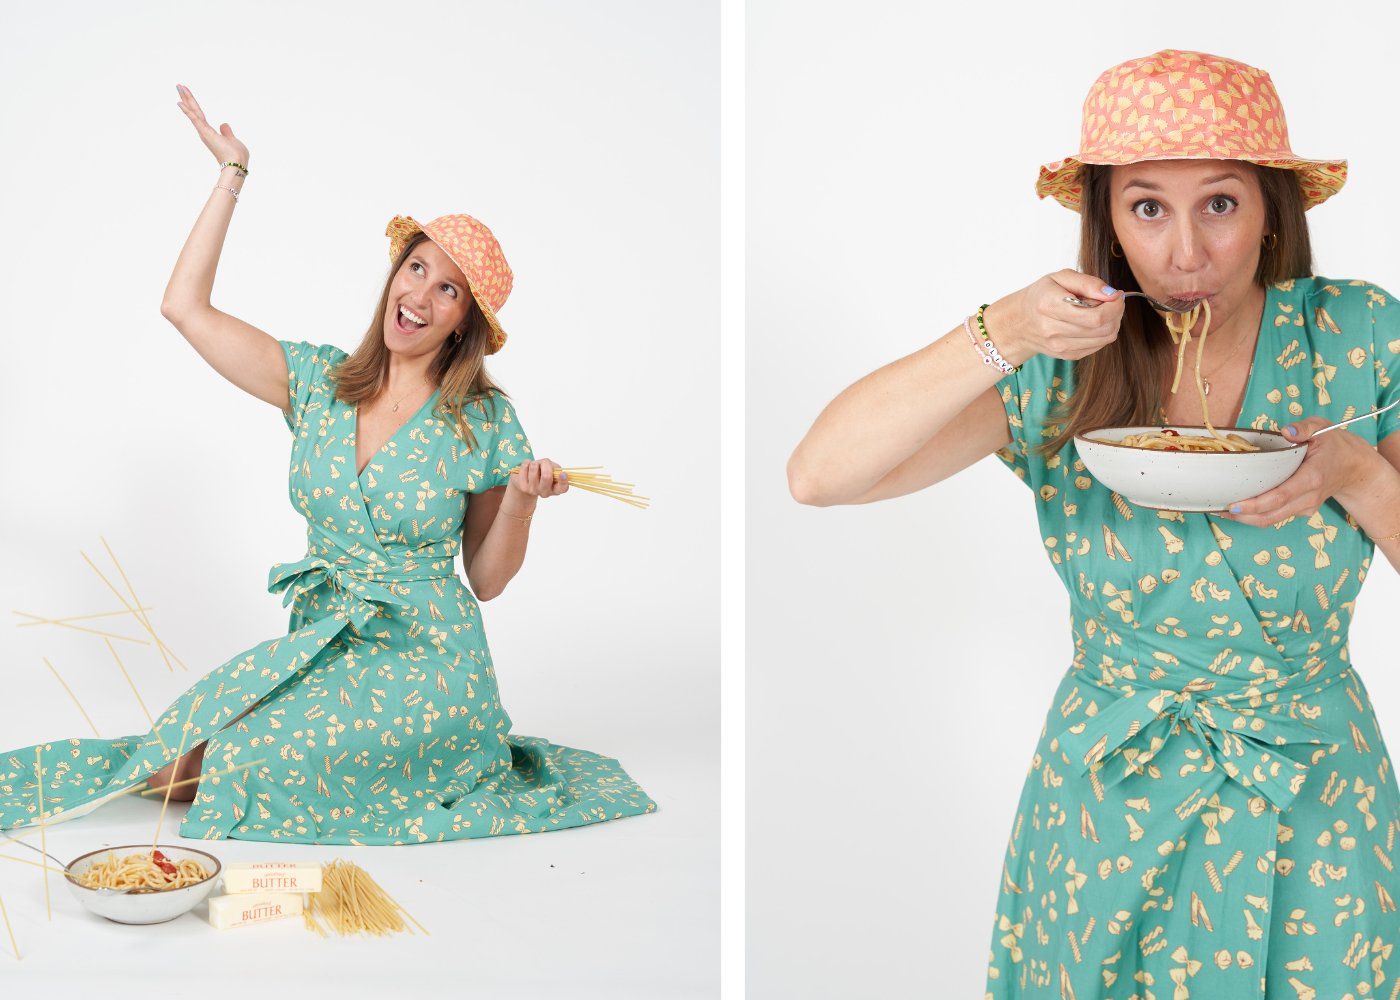 Theresa wears a blue green wrap dress with a pasta print and holds a white bowl of buccatini pasta. She is also wearing a pink bucket hat with a farfalle pasta print.